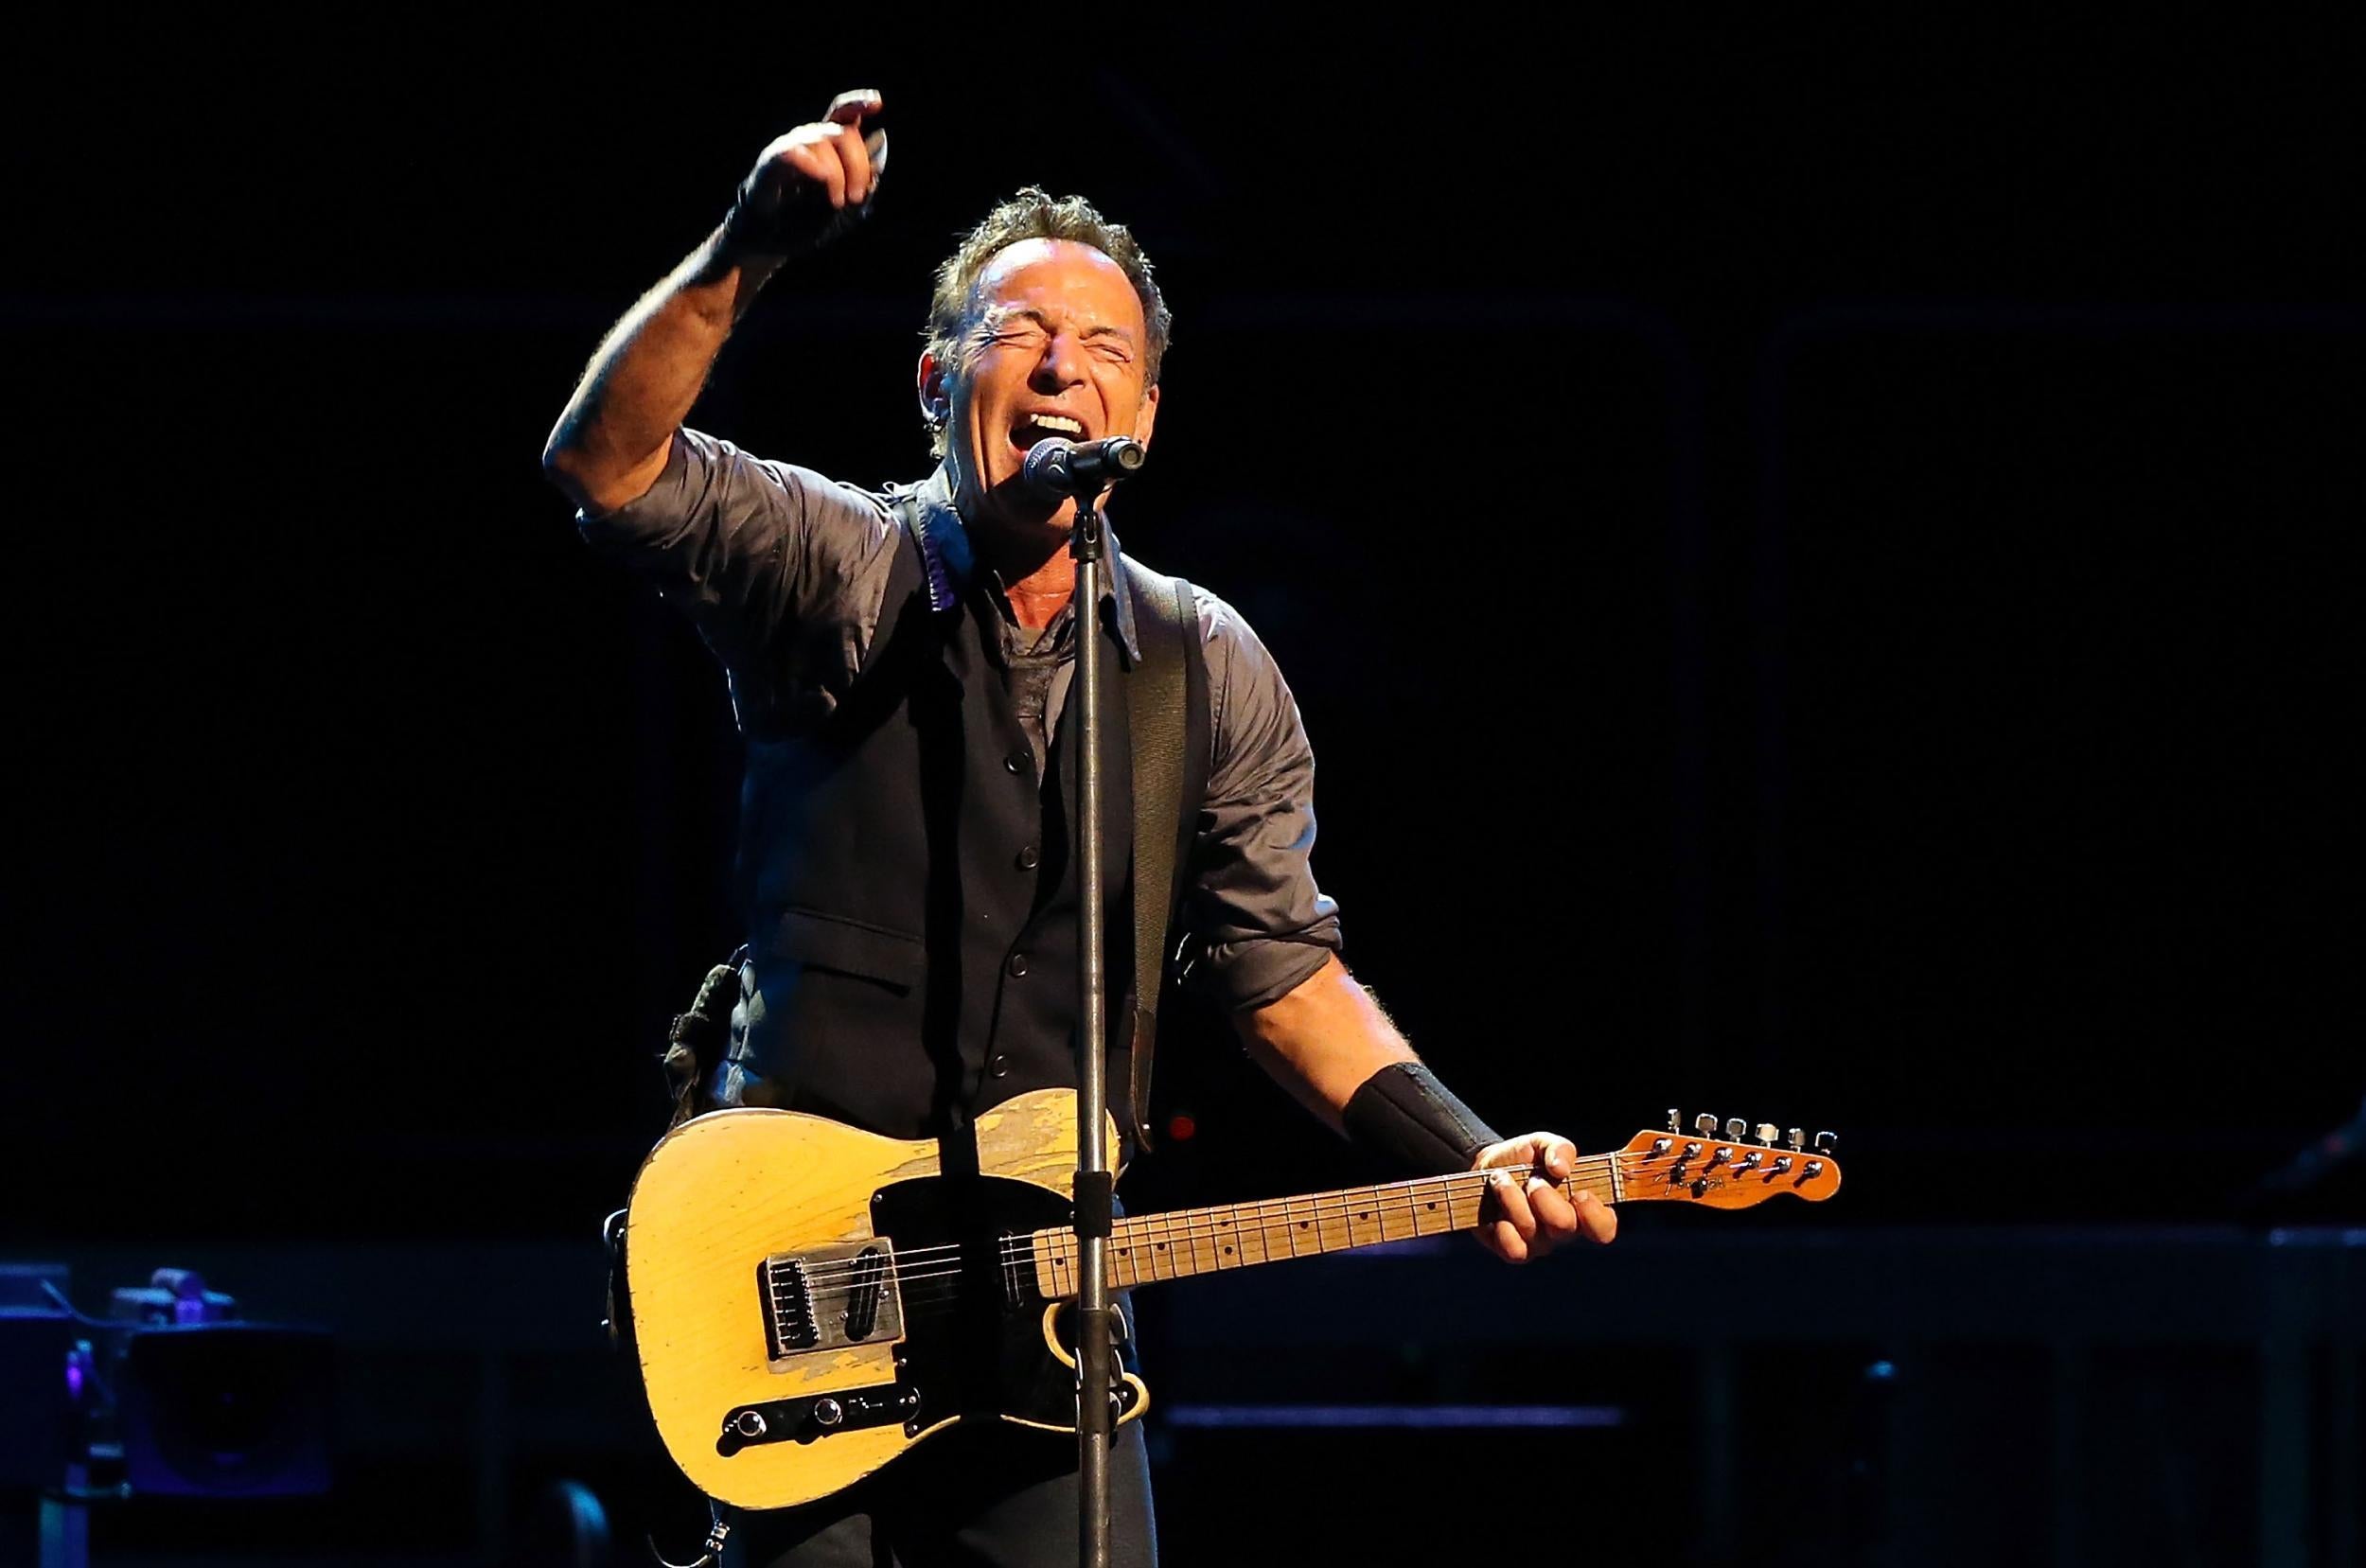 Bruce Springsteen's story, like his music, speaks to us all